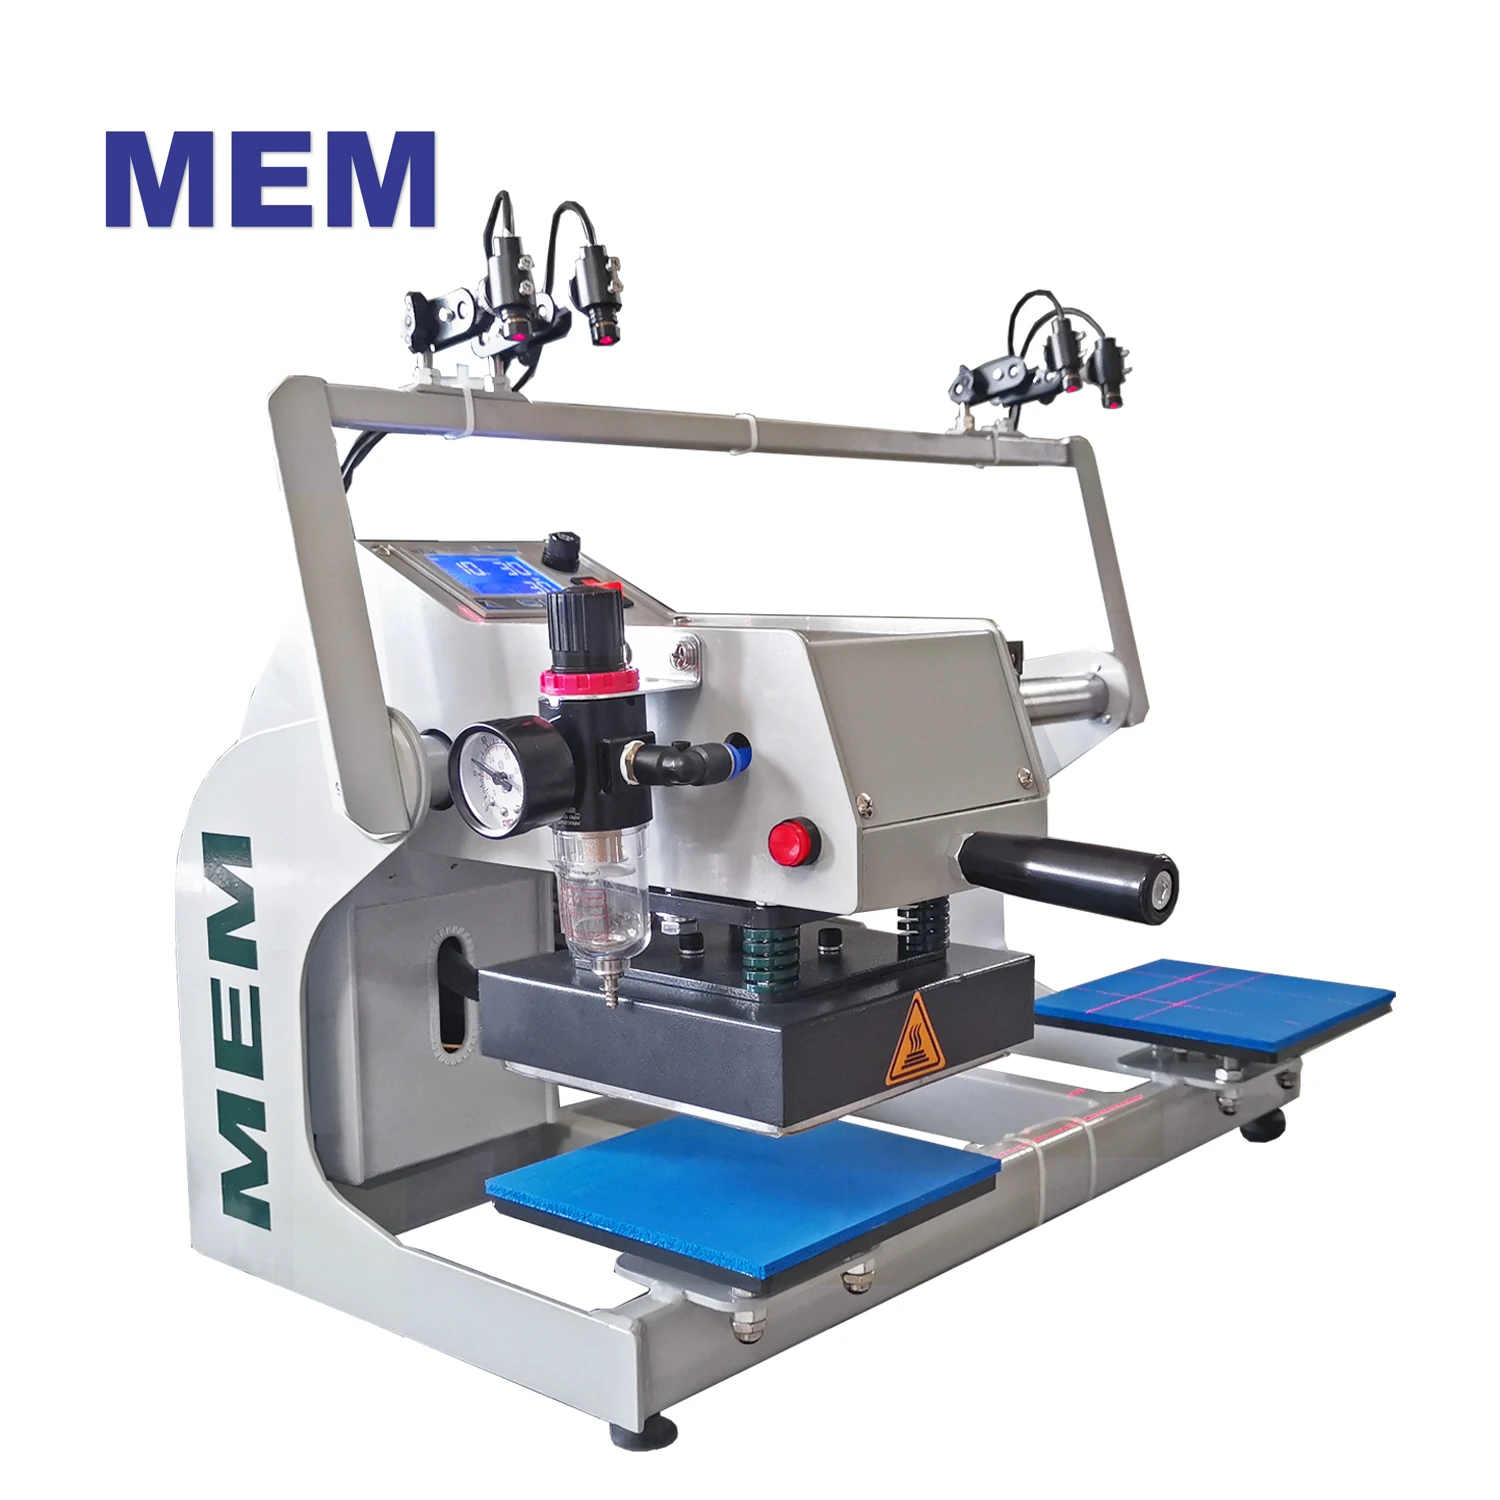 

TQ1515 US free shipment MEM double station heat press 1515 machine for left chest label printing with laser positioning system